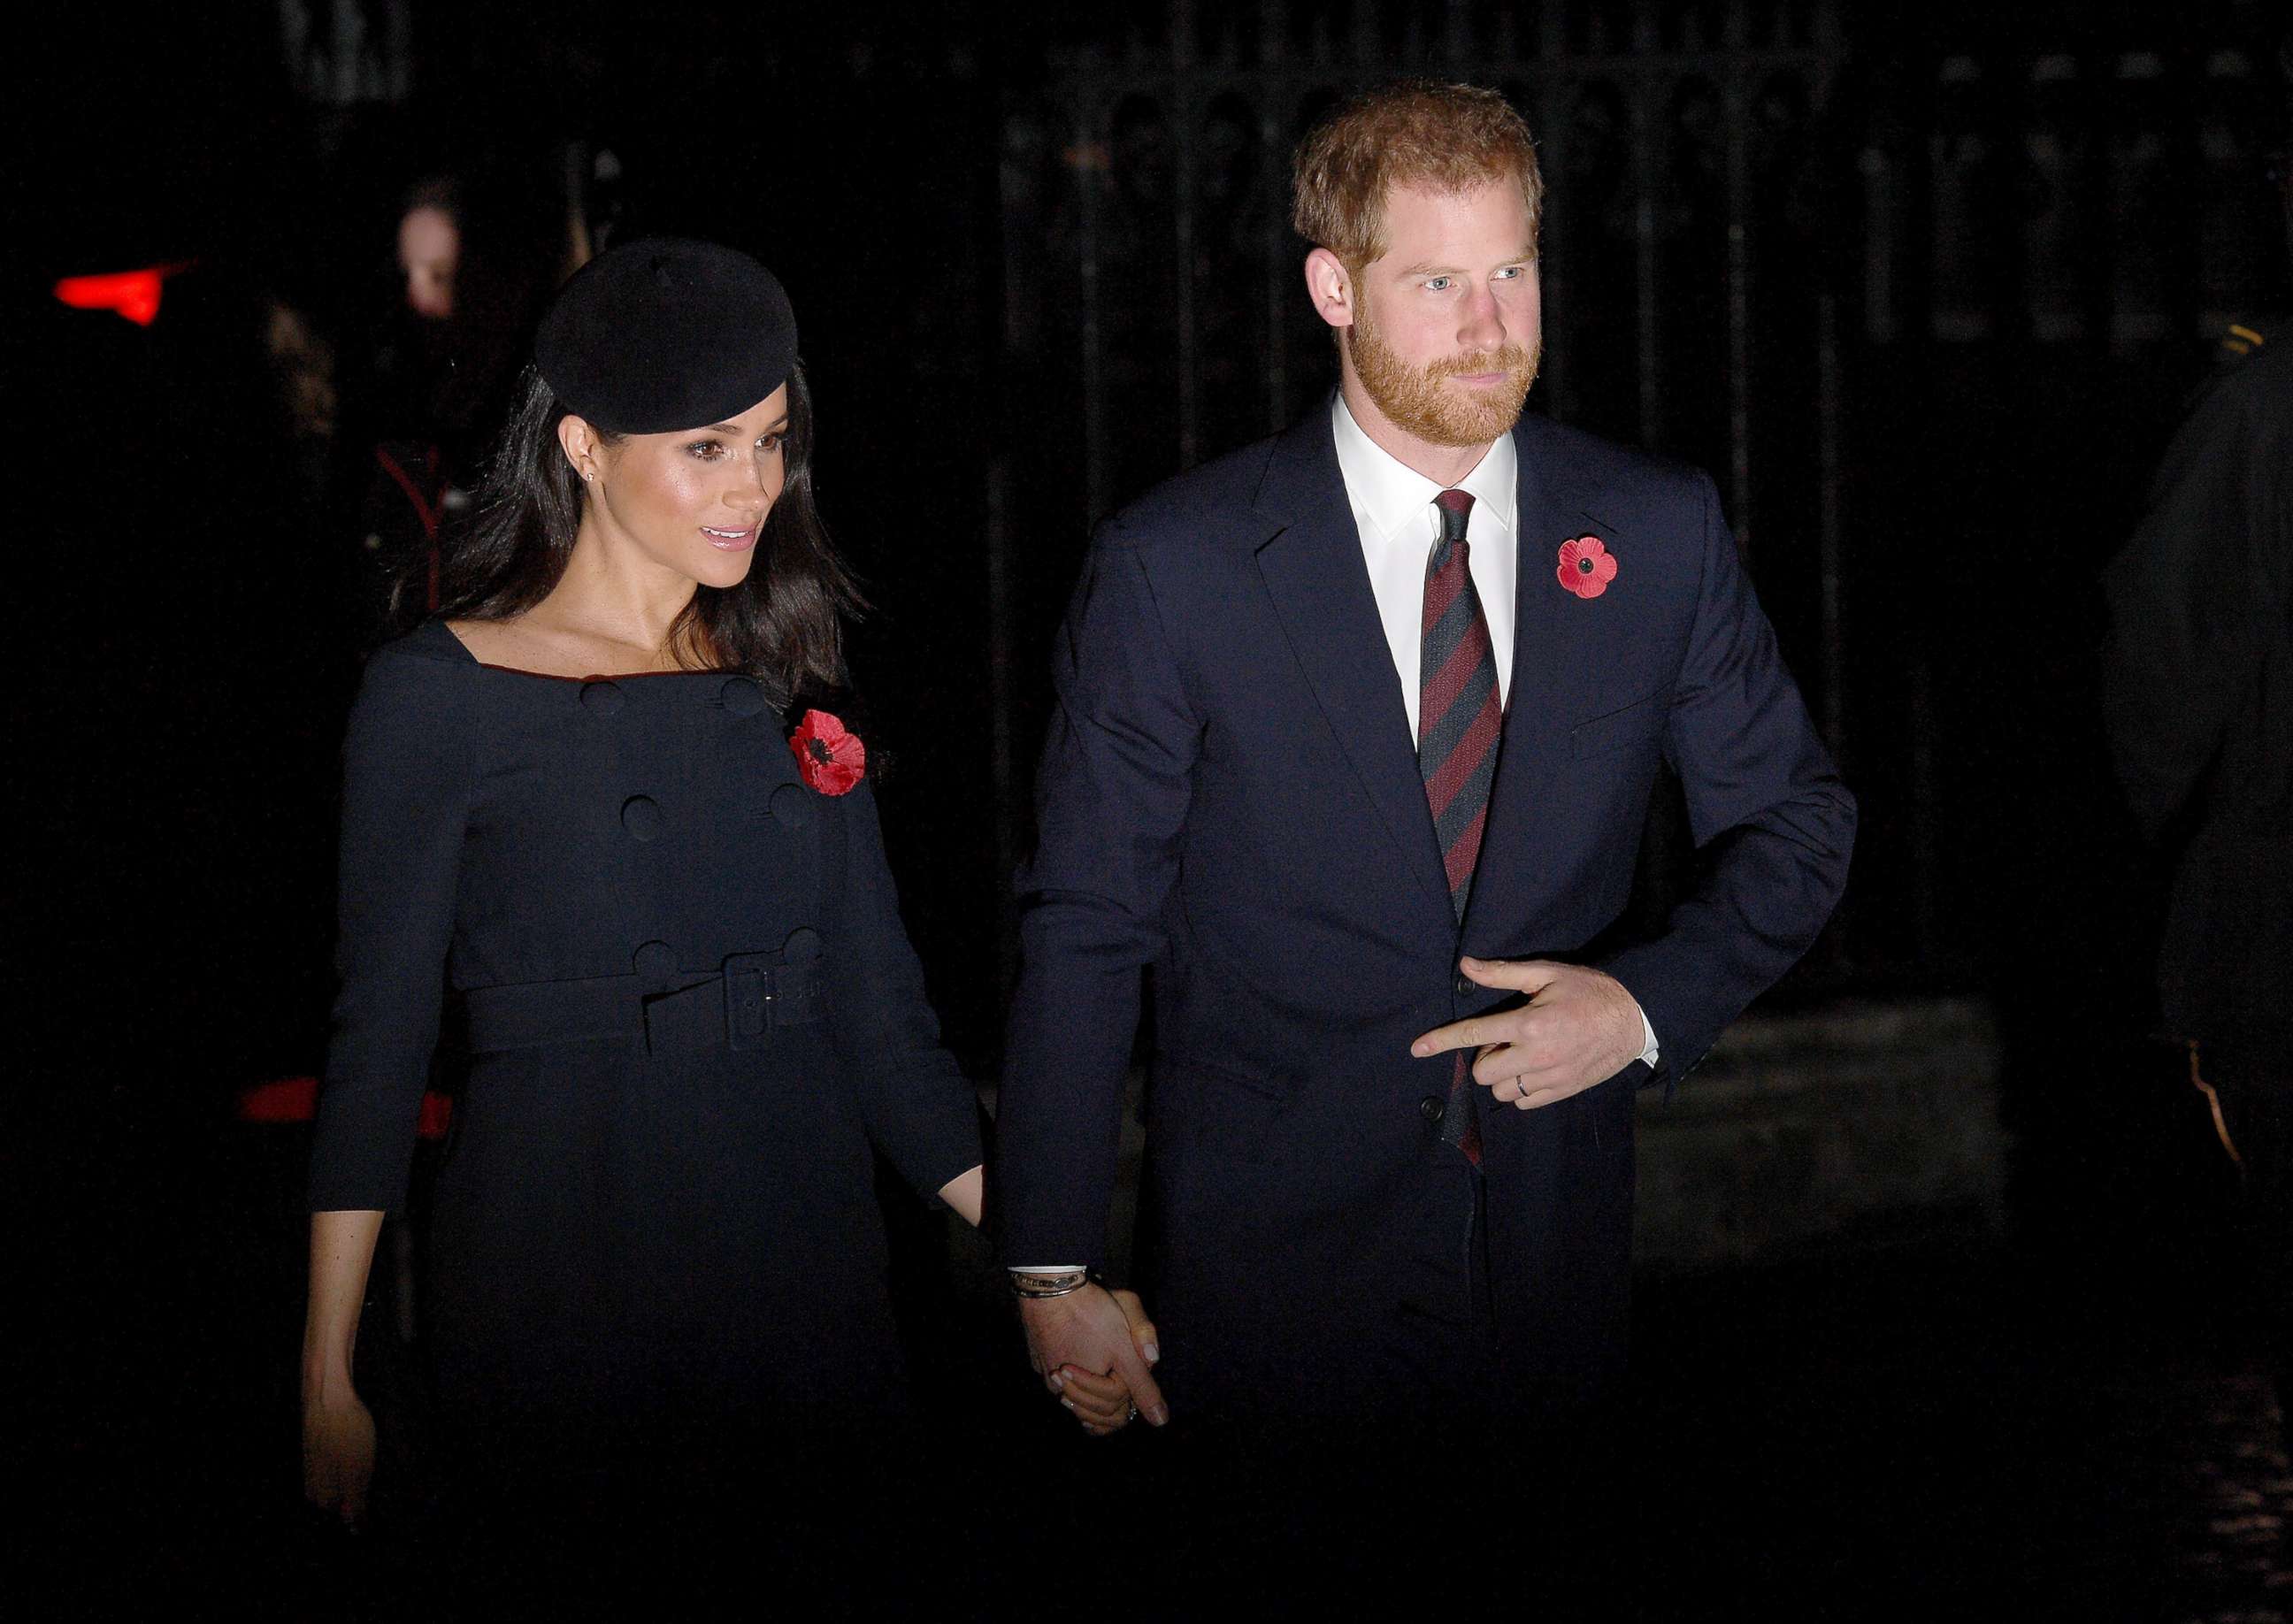 PHOTO: Meghan Markle, Duchess of Sussex and Prince Harry, Duke of Sussex attend a service marking the centenary of WW1 armistice at Westminster Abbey, Nov. 11, 2018, in London.